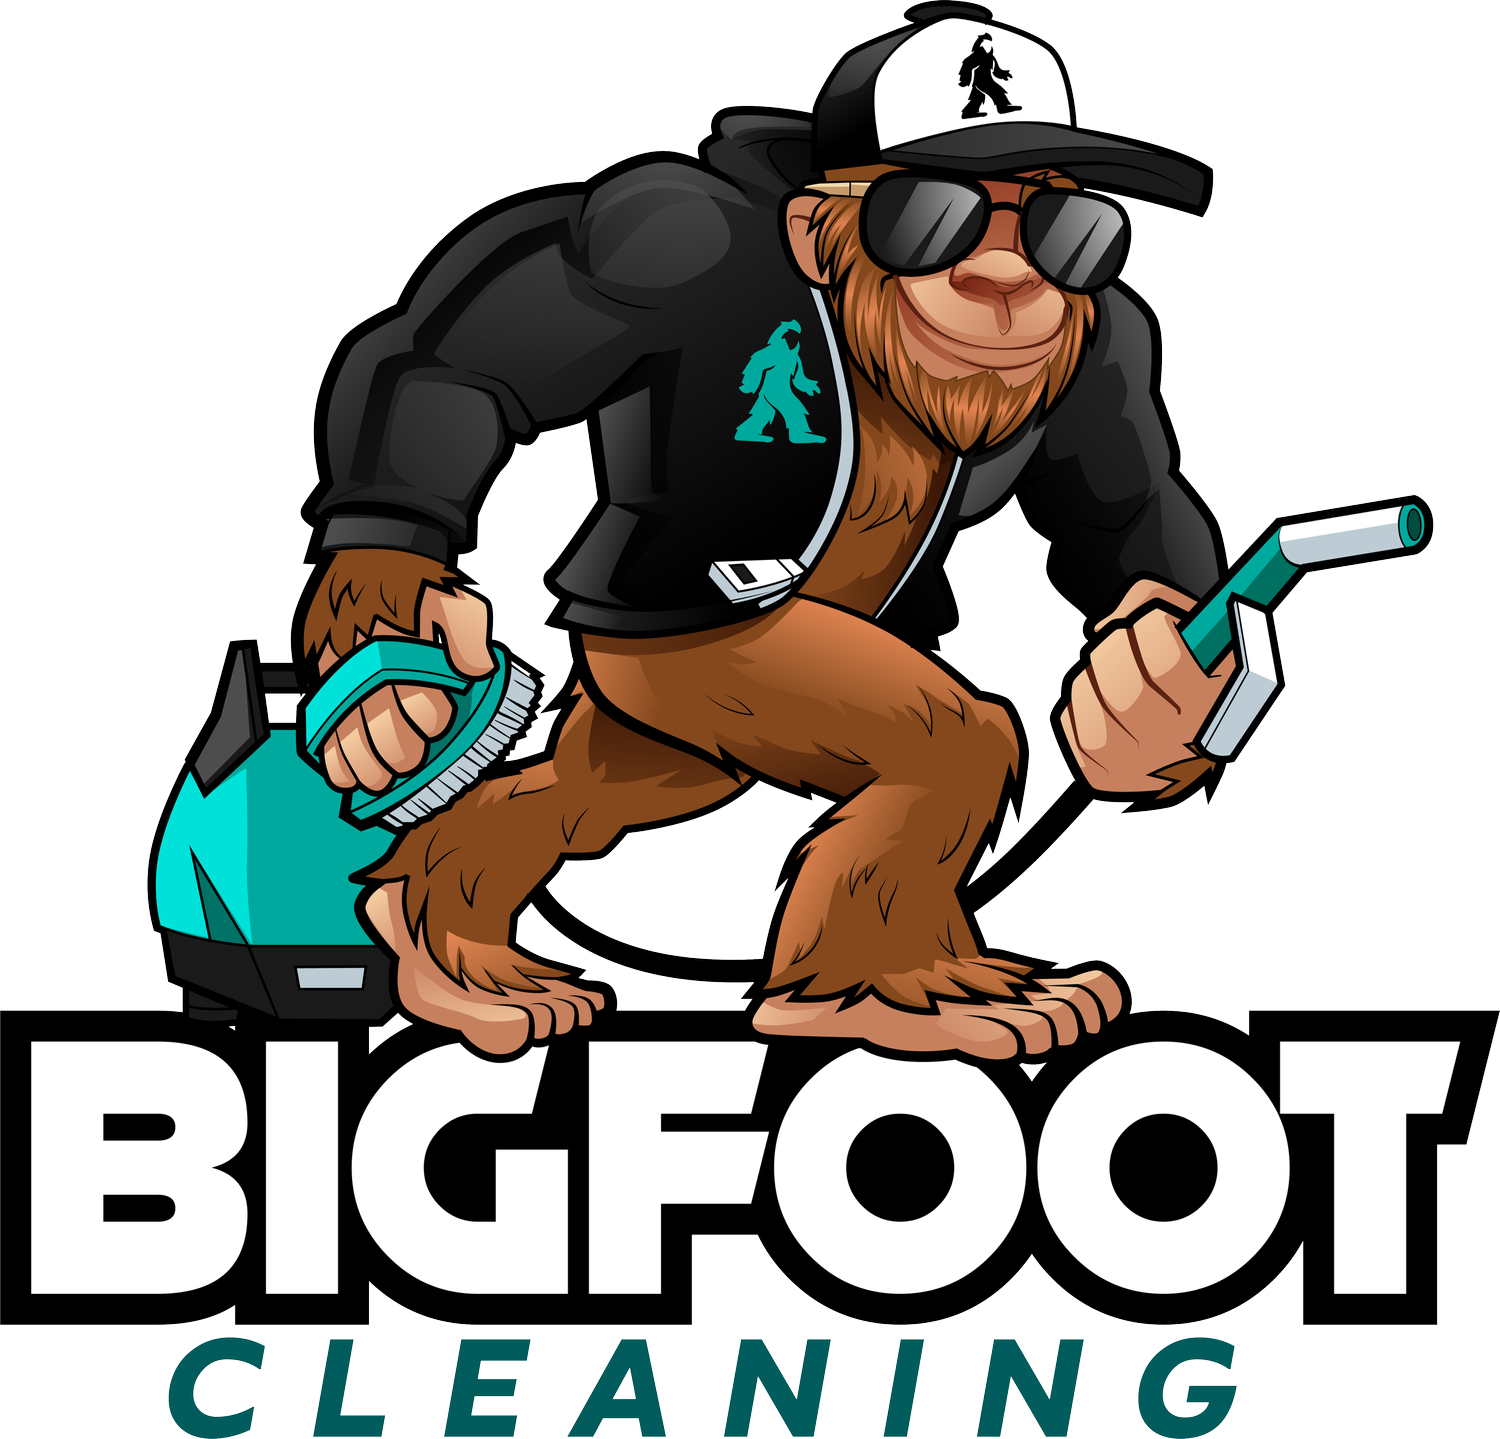 Bigfoot Cleaning | BBQ Grill Cleaning Service